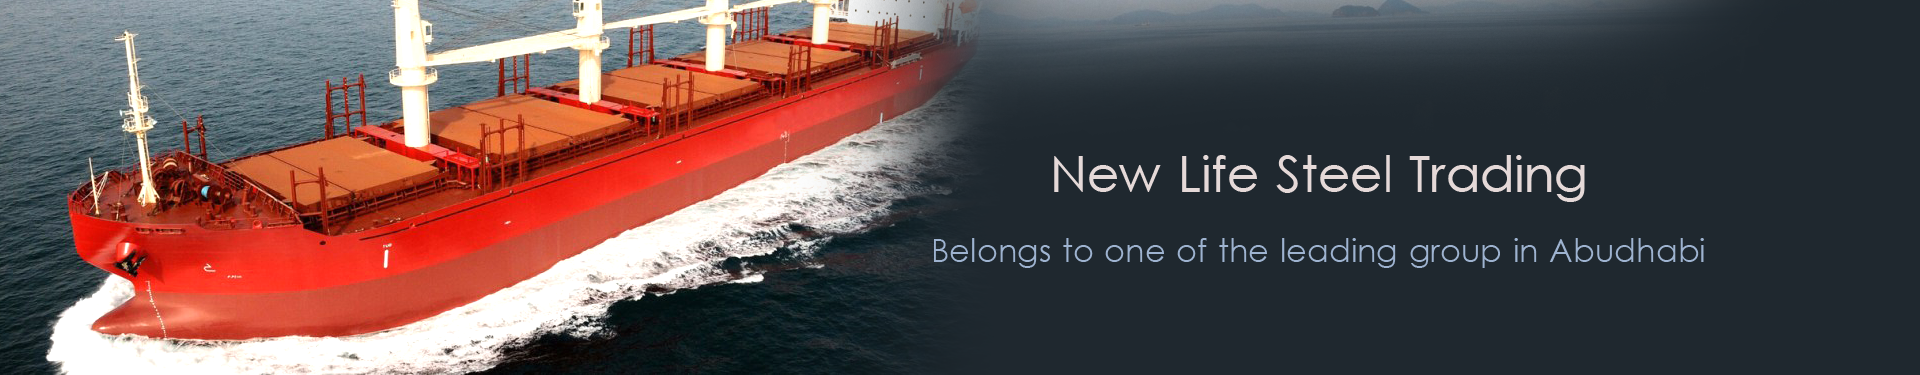 New Life Steel Trading. belongs to one of the leading group in Abudhabi